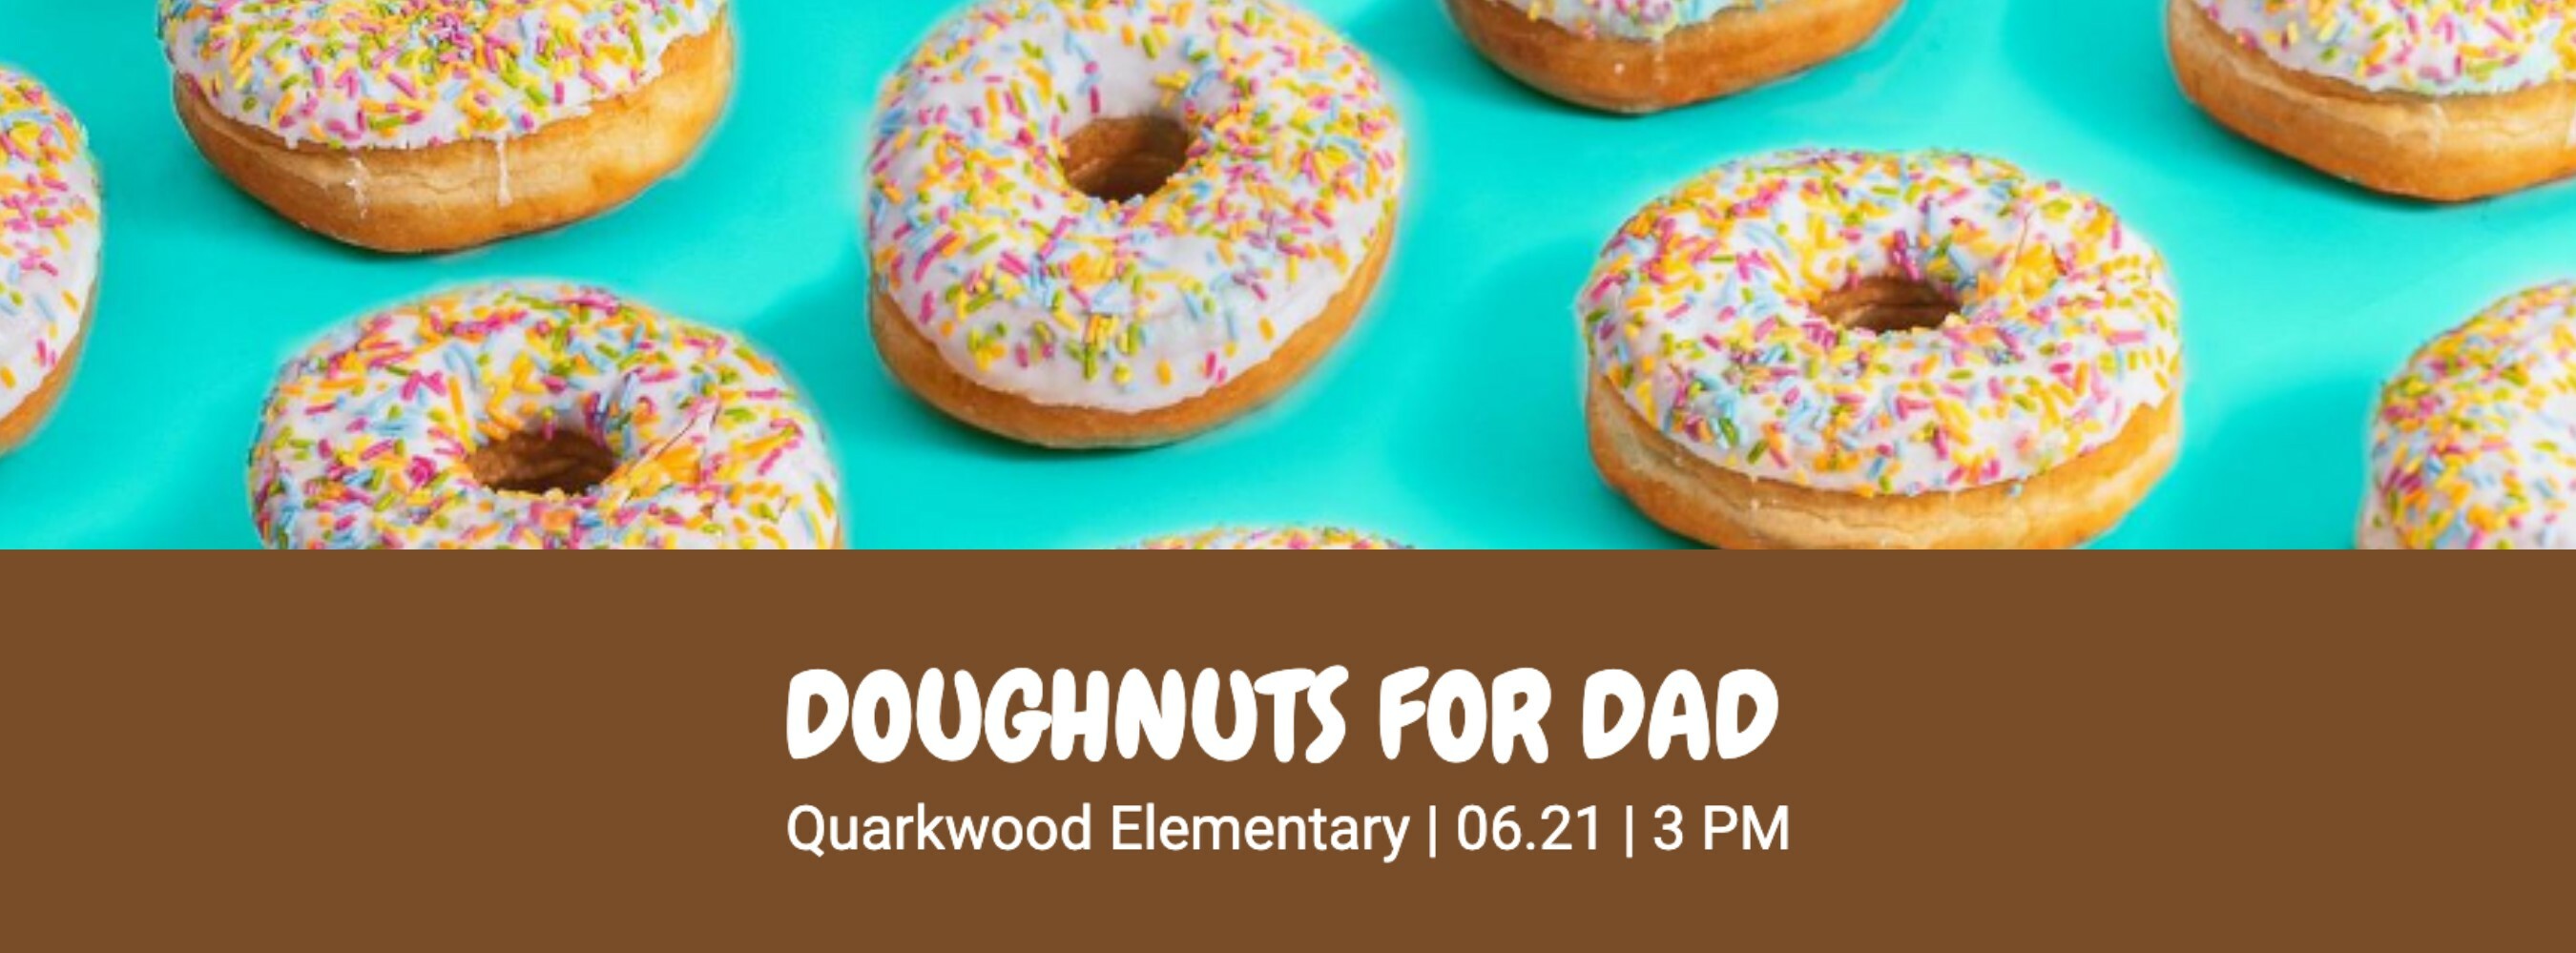 Doughnuts for Dad Promo template